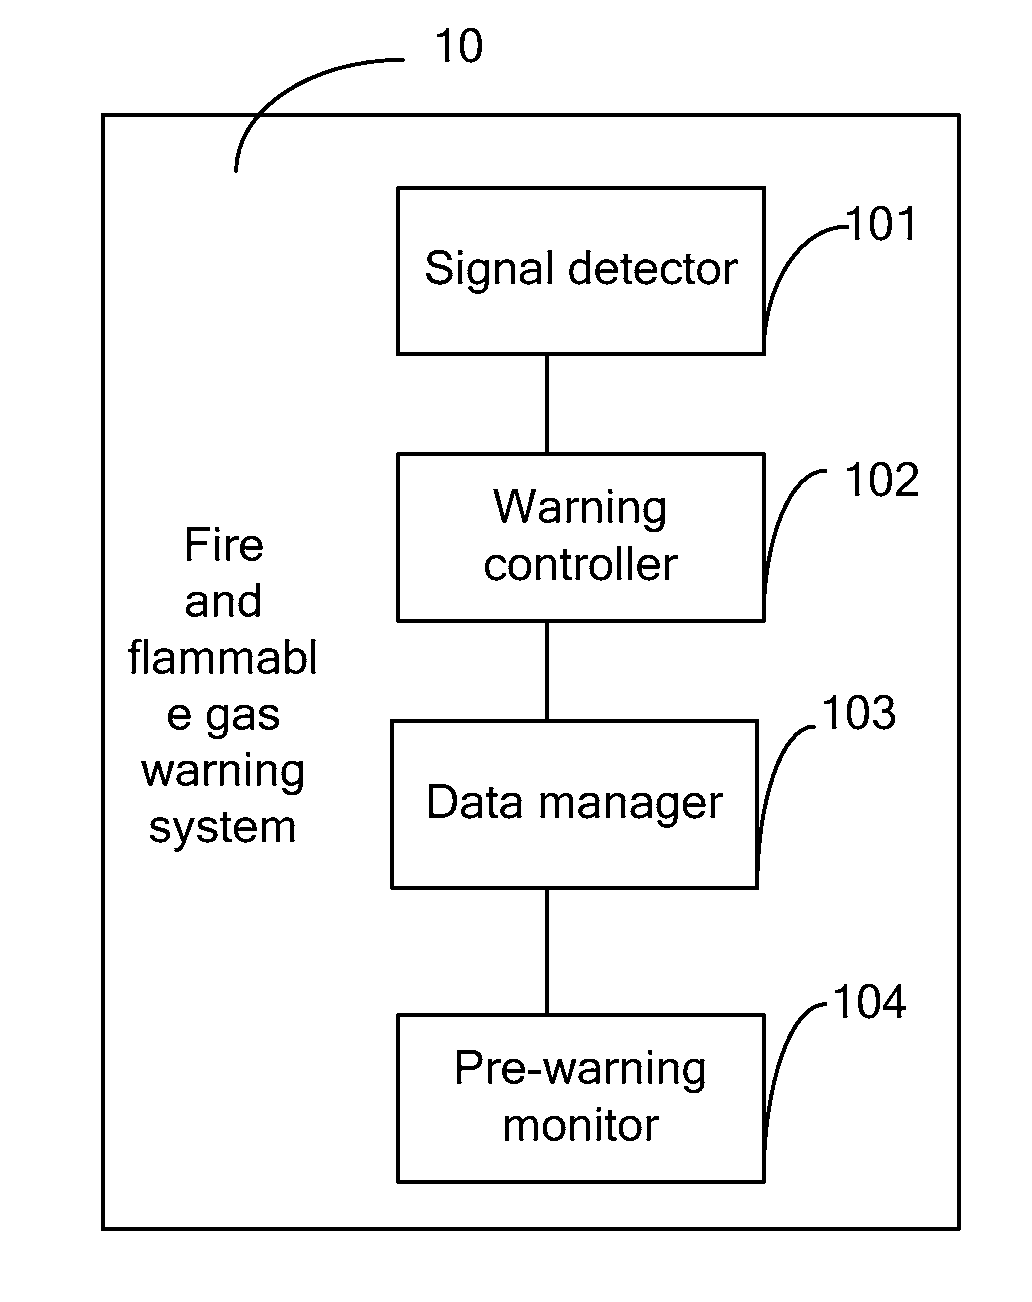 System and method for warning a fire and flammable gas